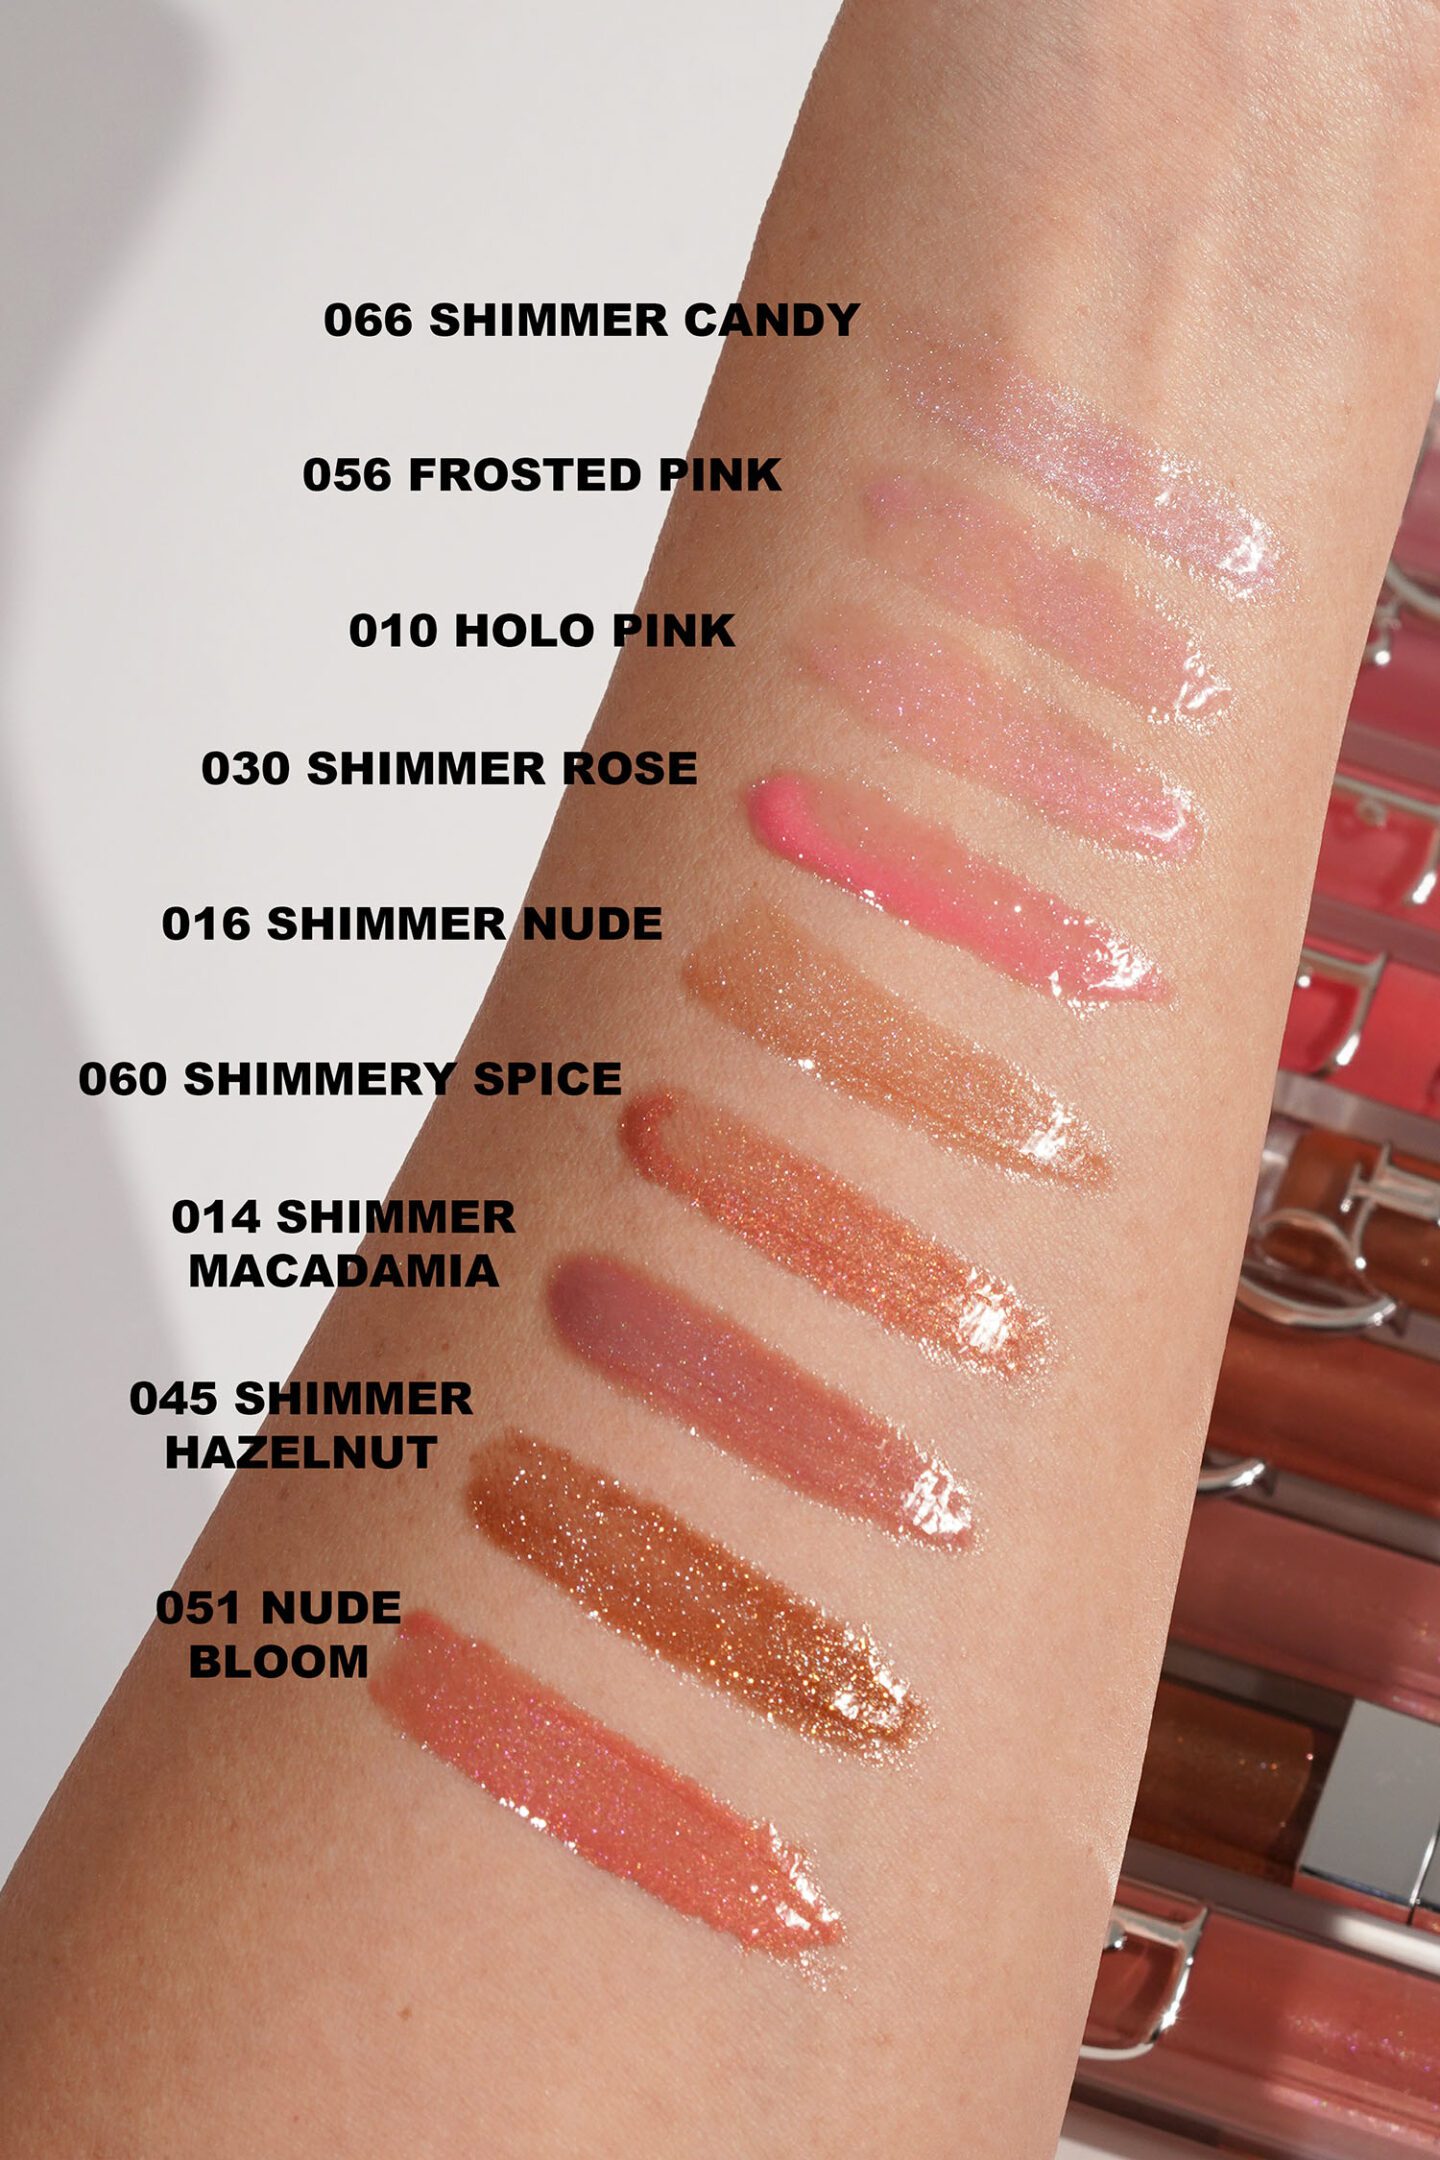 Dior Addict Lip Maximizer Frosted Pink and Shimmery Spice swatch comparisons